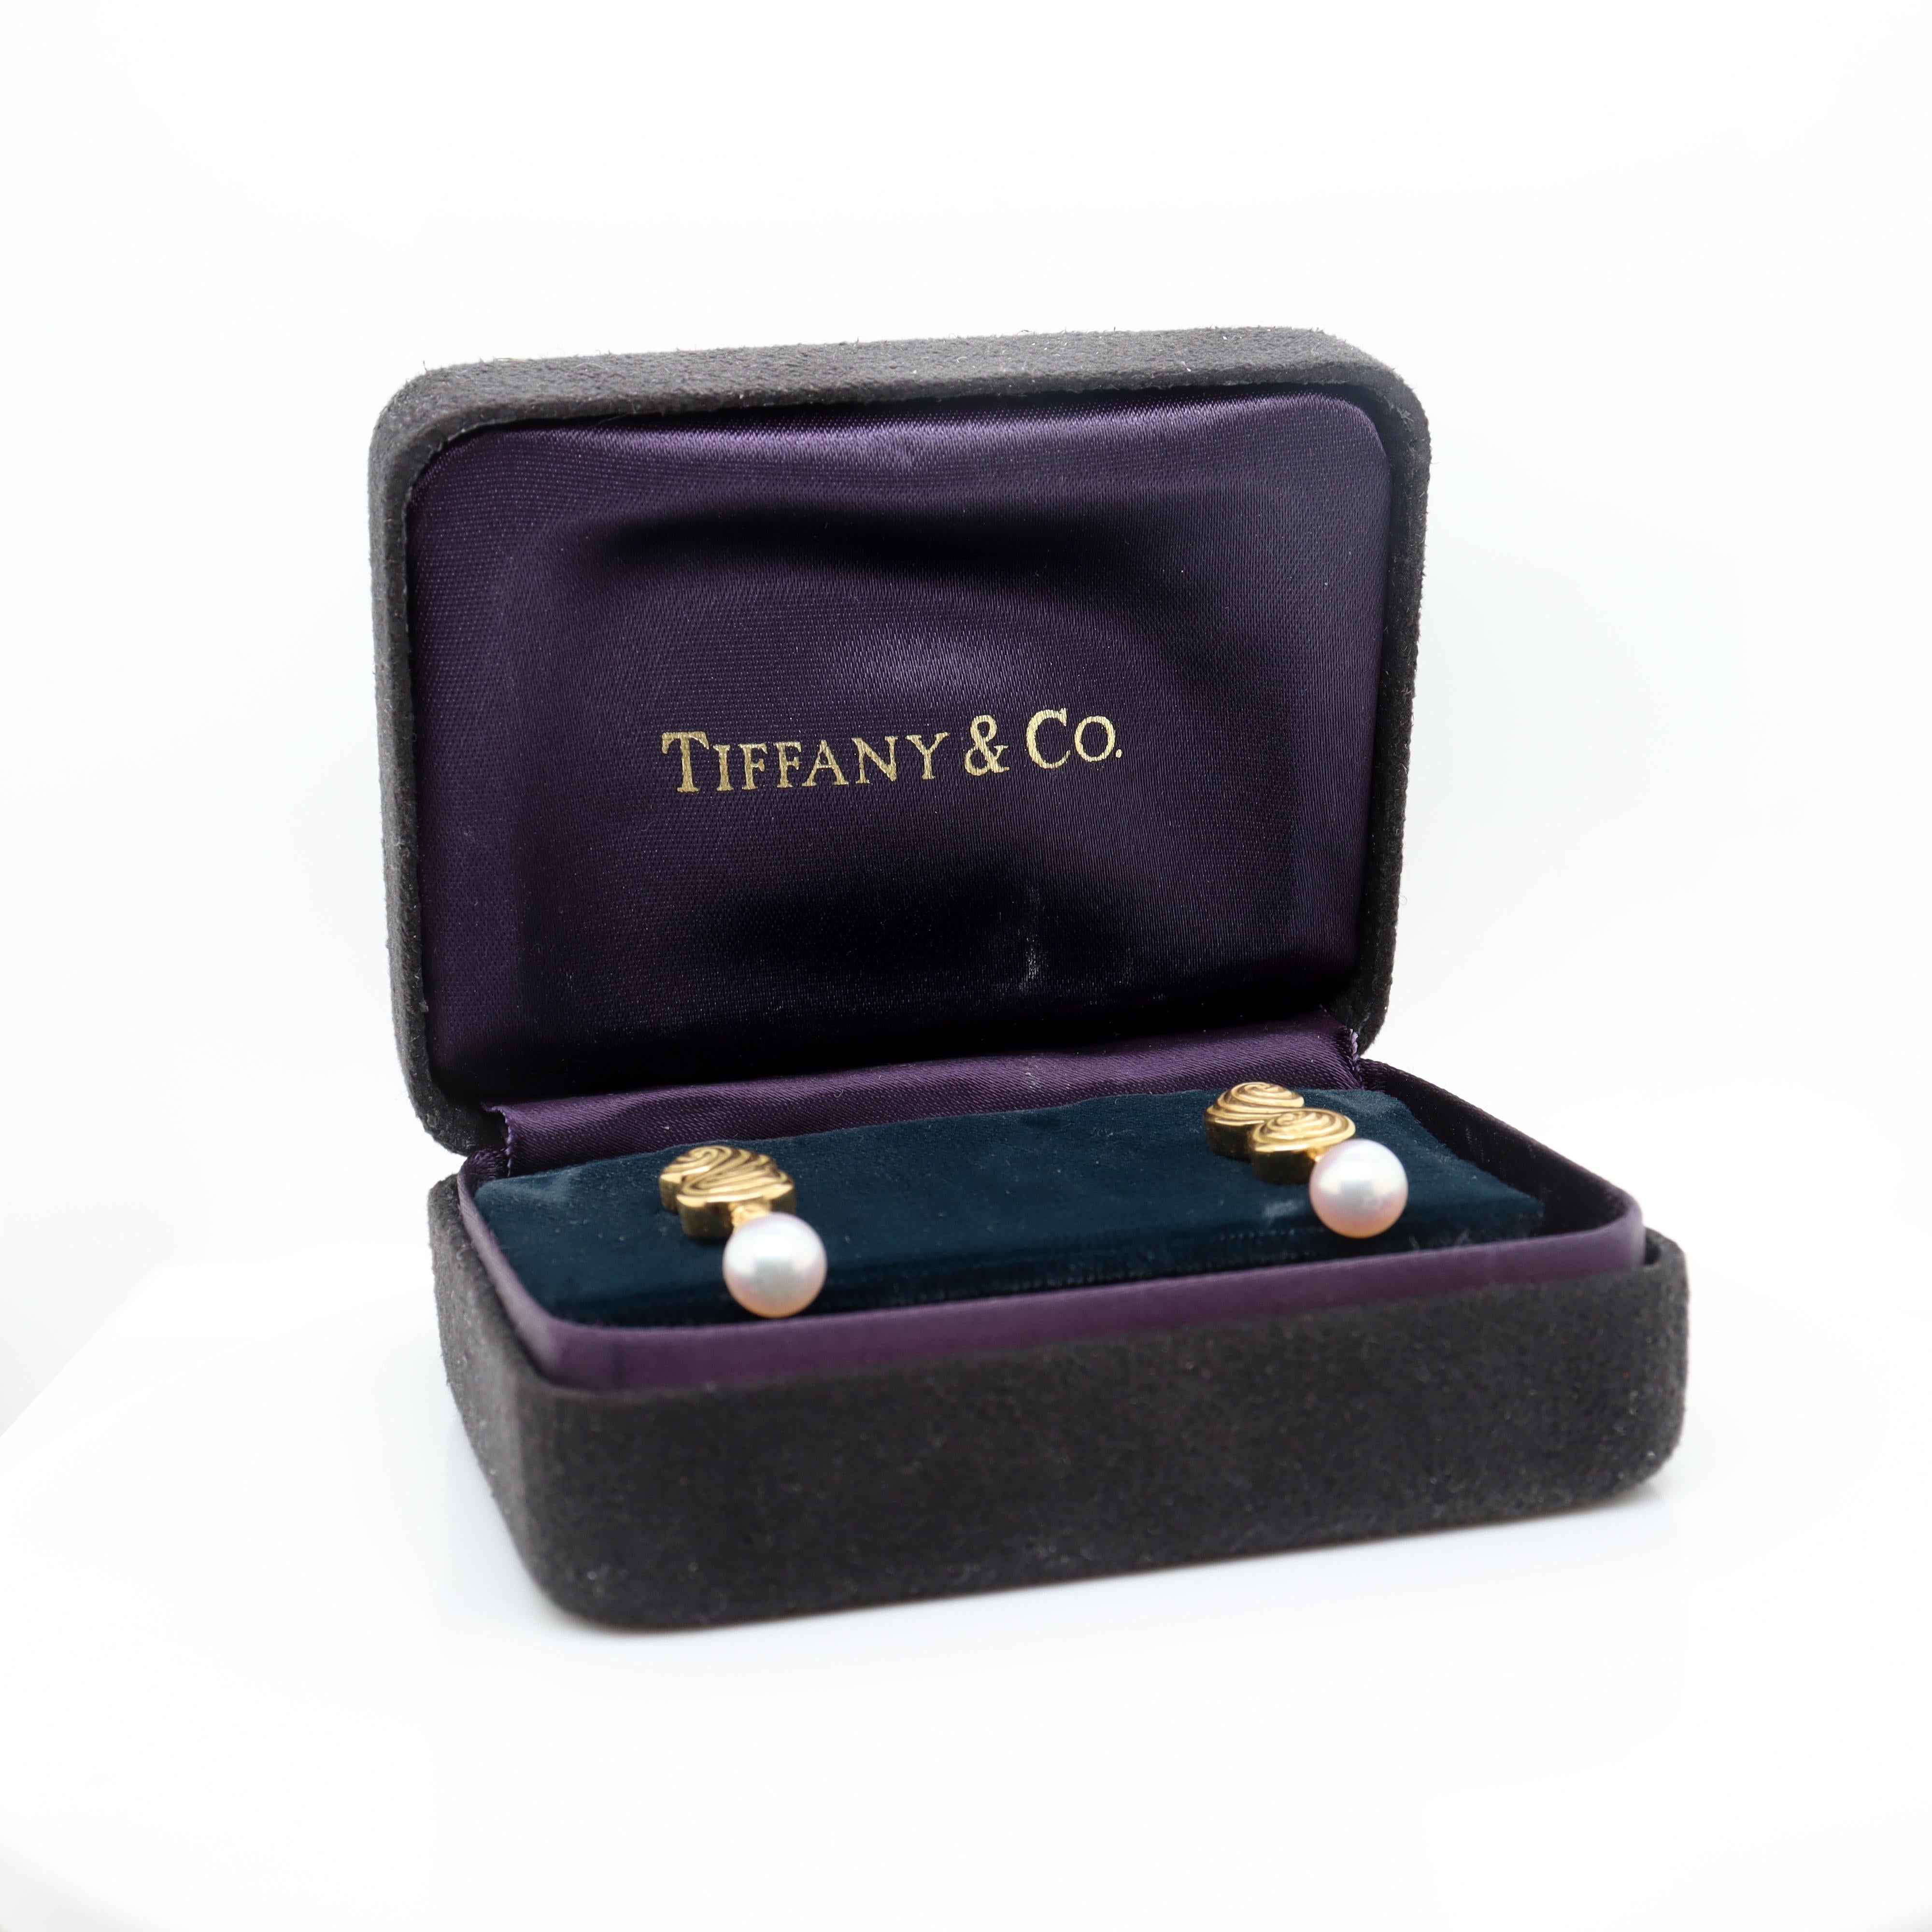 Vintage Tiffany & Co 18K Gold Double Spiral or 'S' Scroll Earrings w Pearl Drops For Sale 4